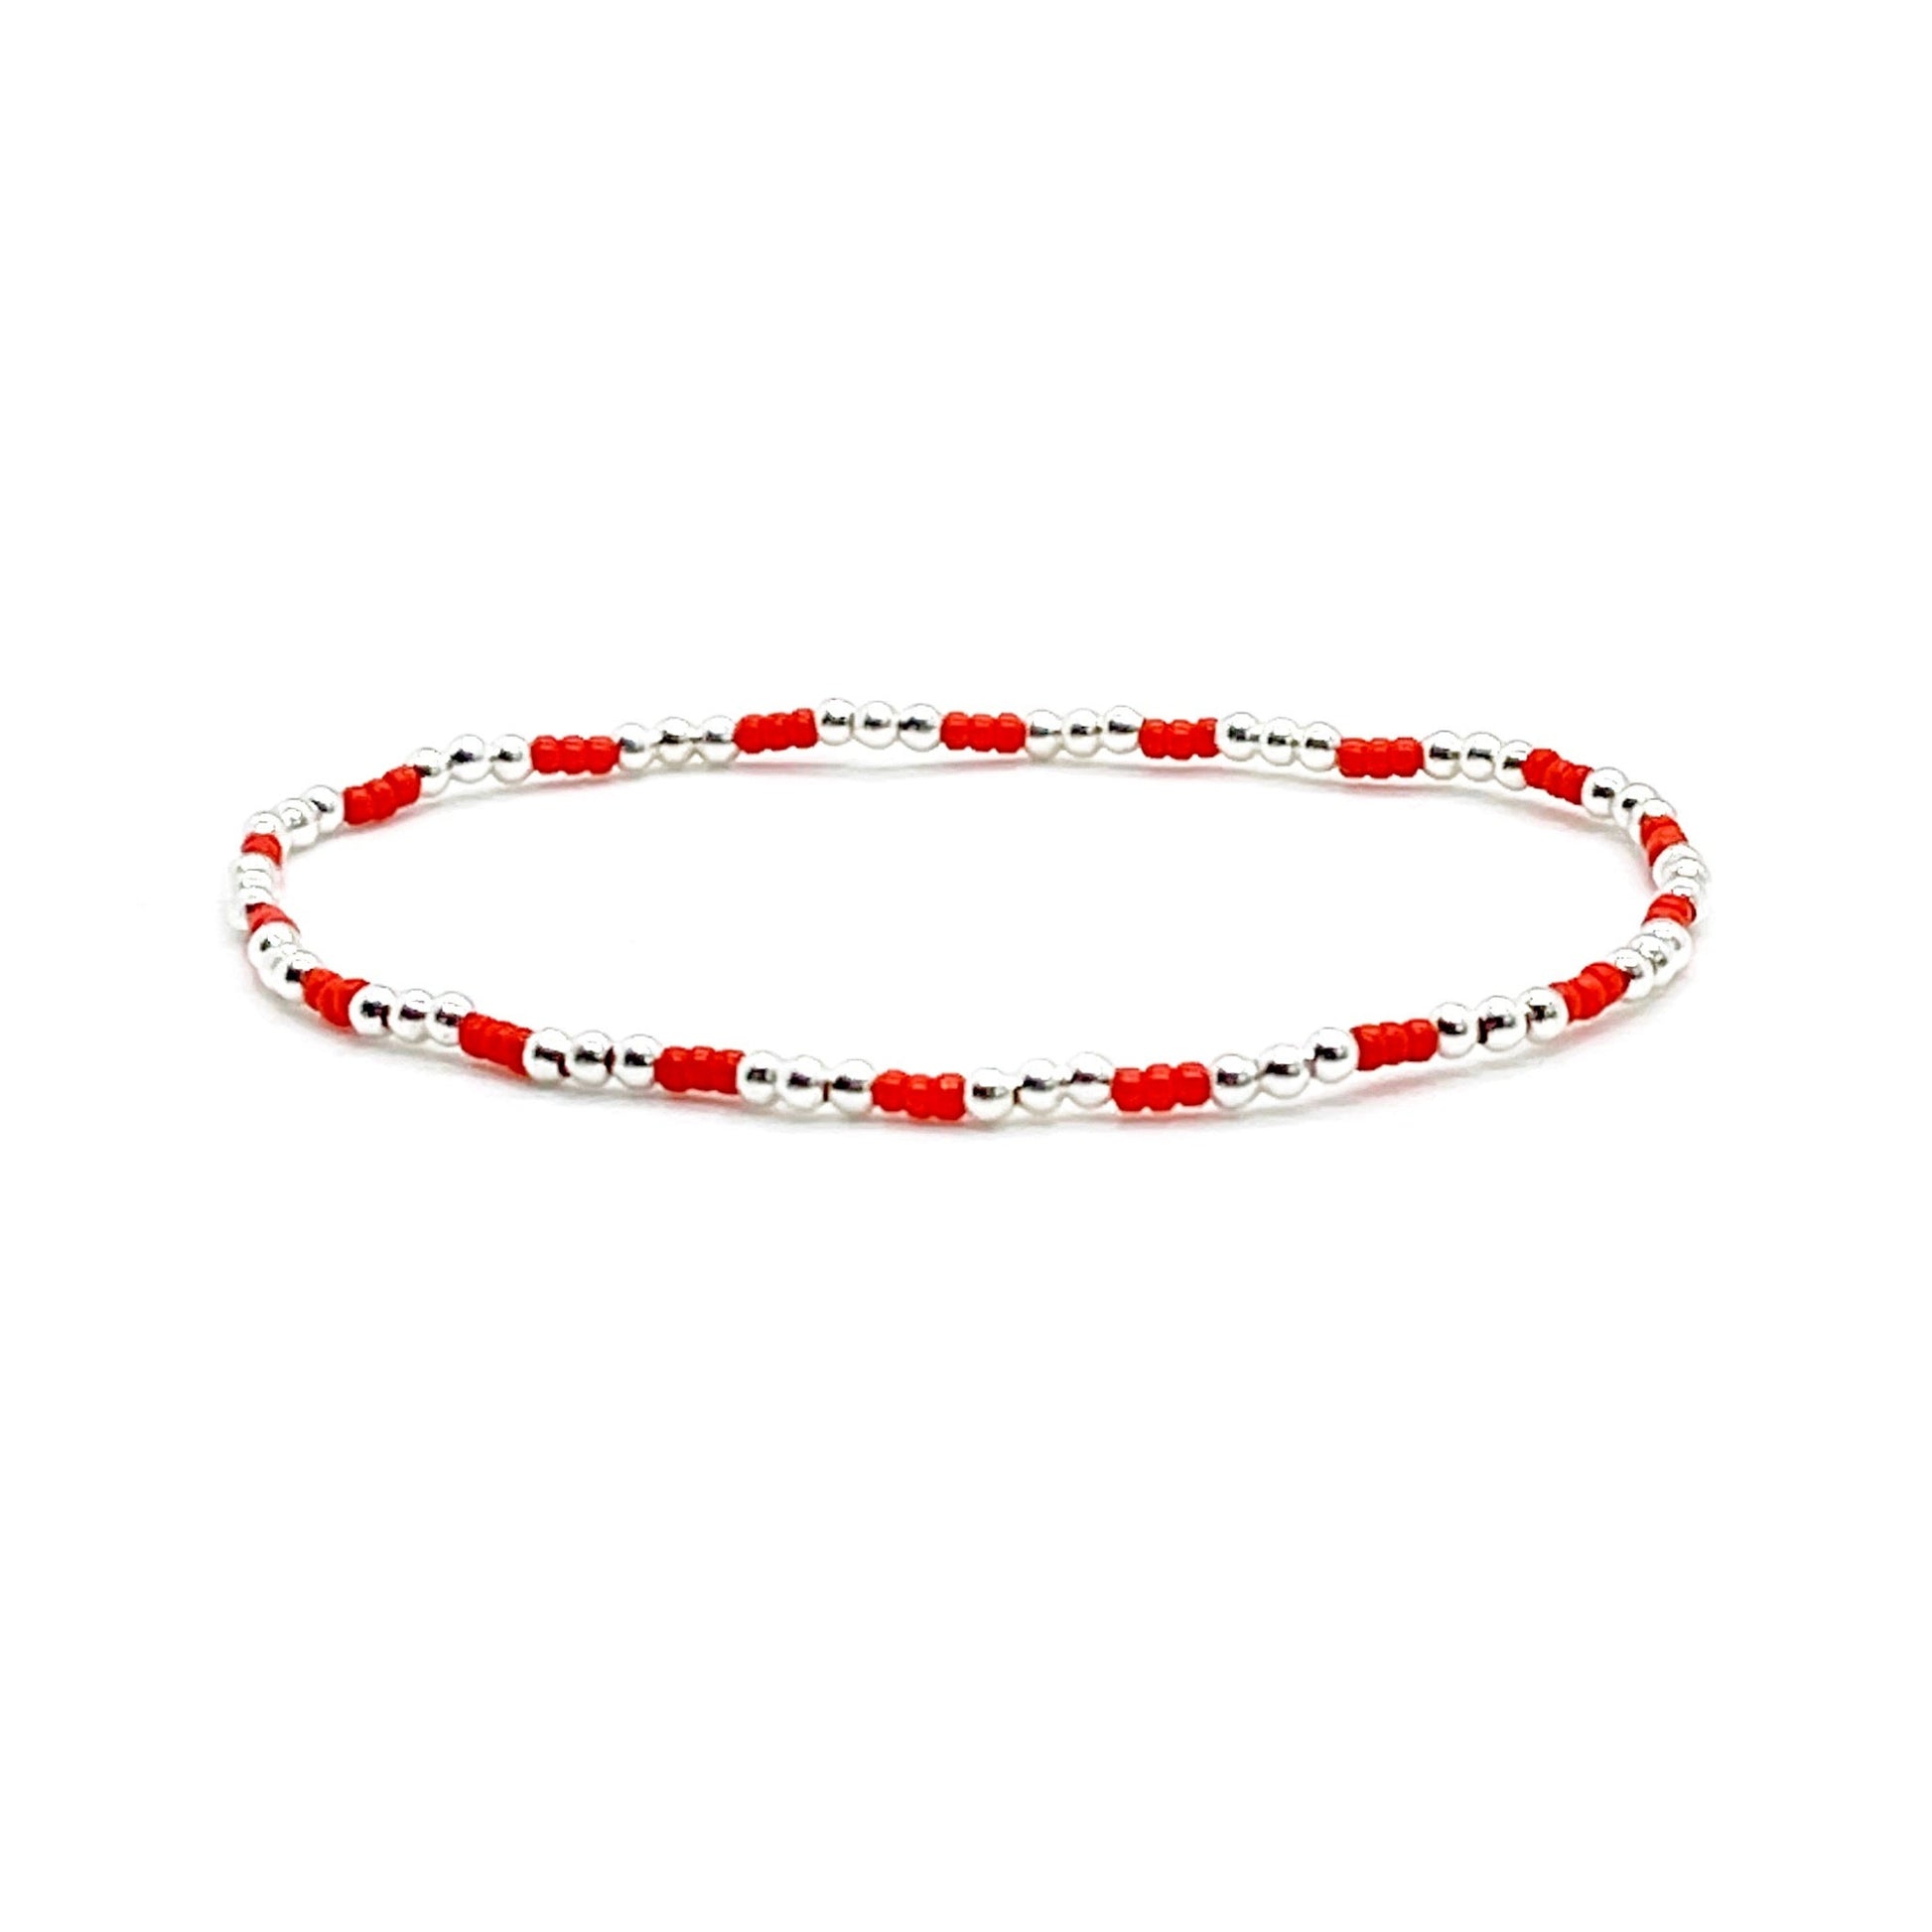 Red beaded bracelet with tiny 2mm sterling silver beads on elastic cord.